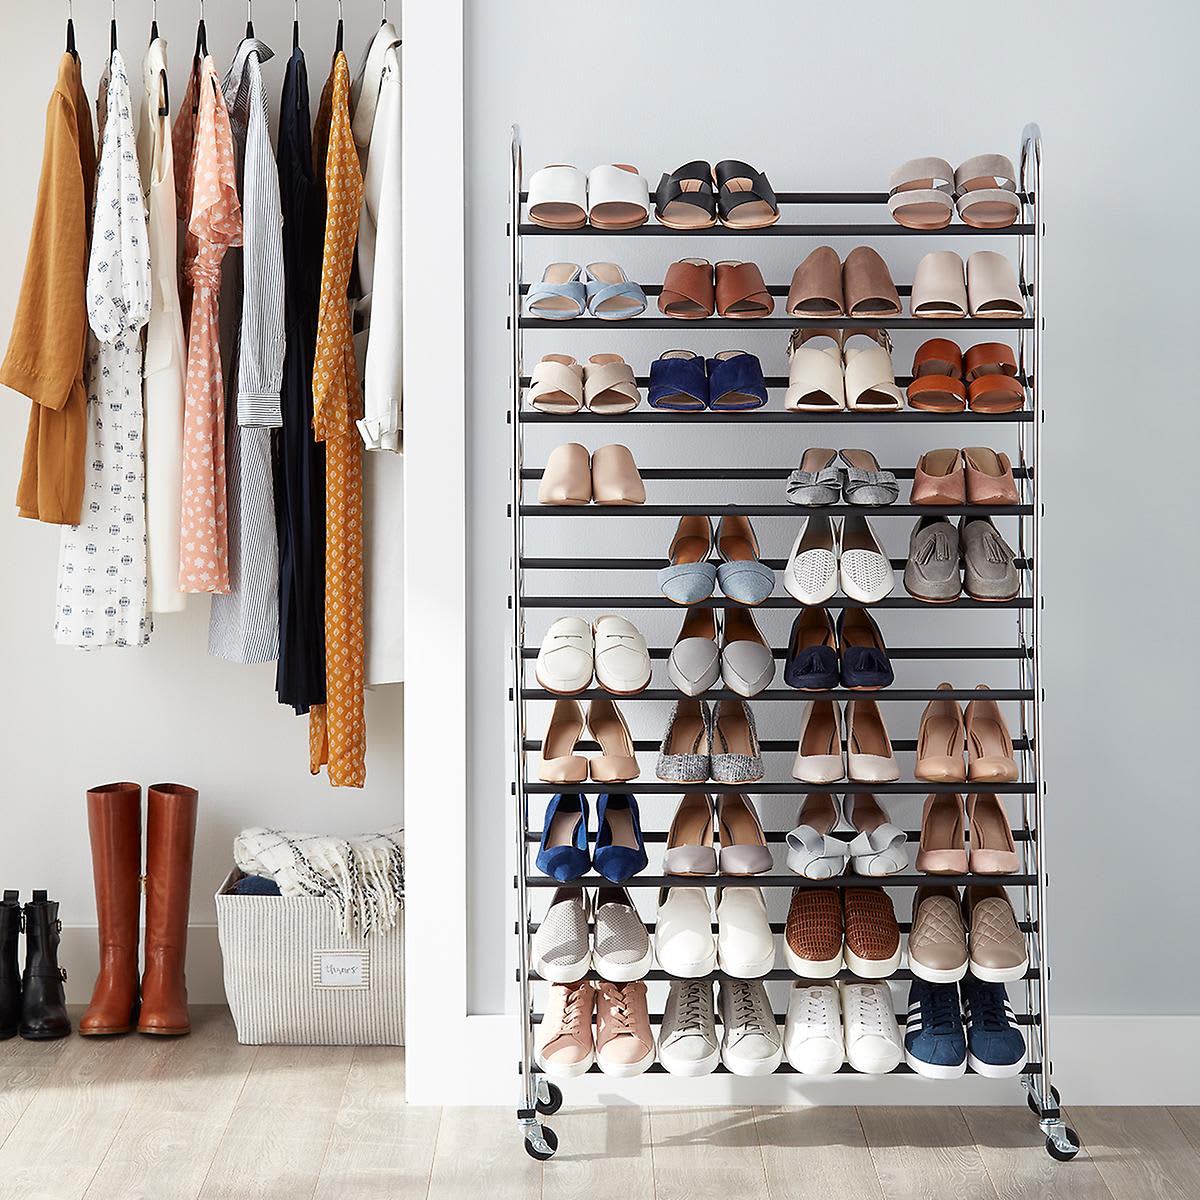 https://cdn.apartmenttherapy.info/image/upload/v1615481668/gen-workflow/product-database/chrome-metal-10-tier-rolling-shoe-rack-the-container-store.jpg